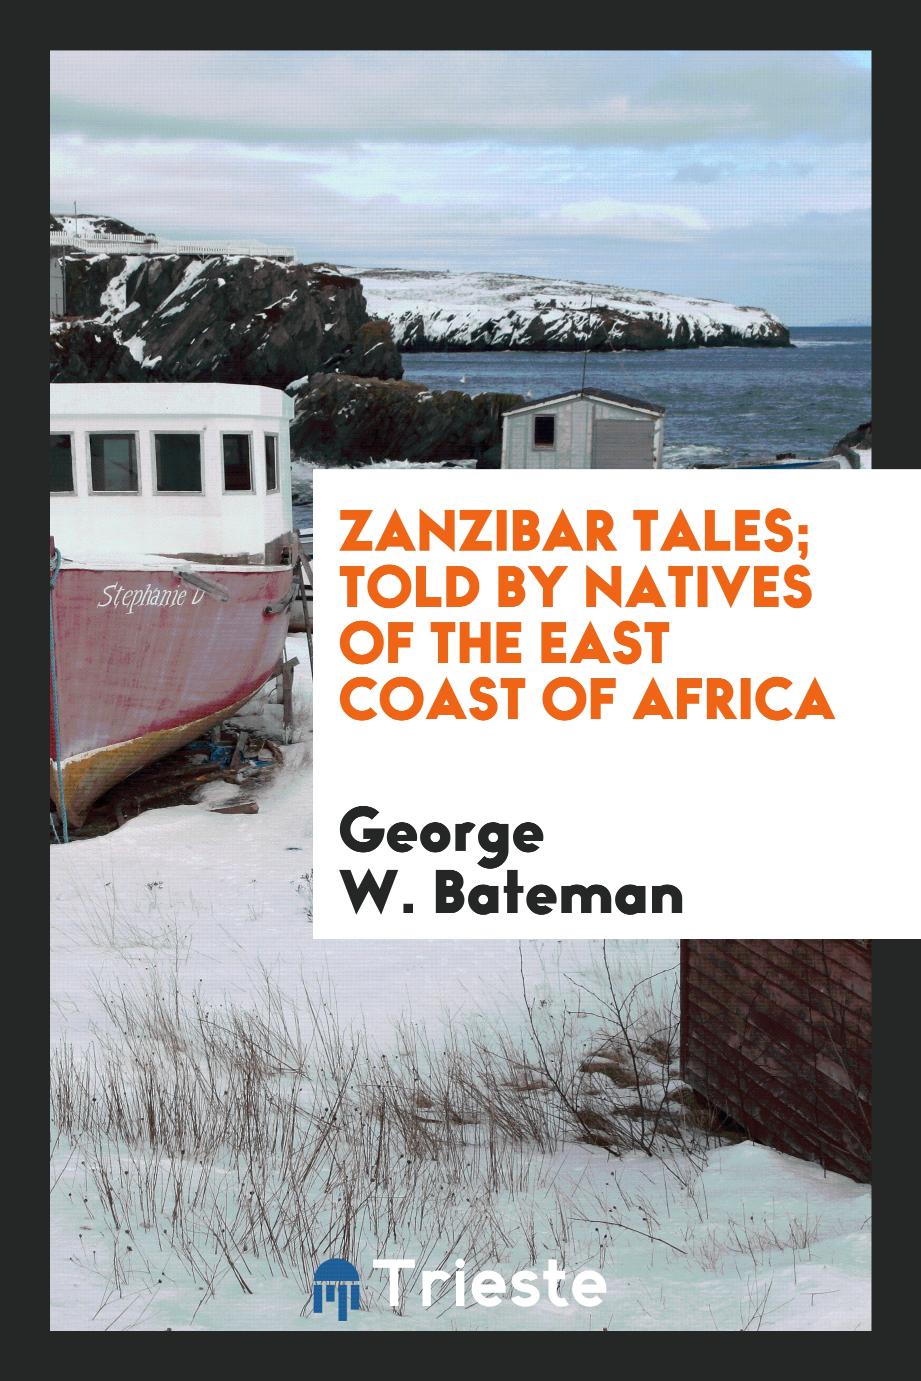 Zanzibar Tales; told by natives of the east coast of Africa